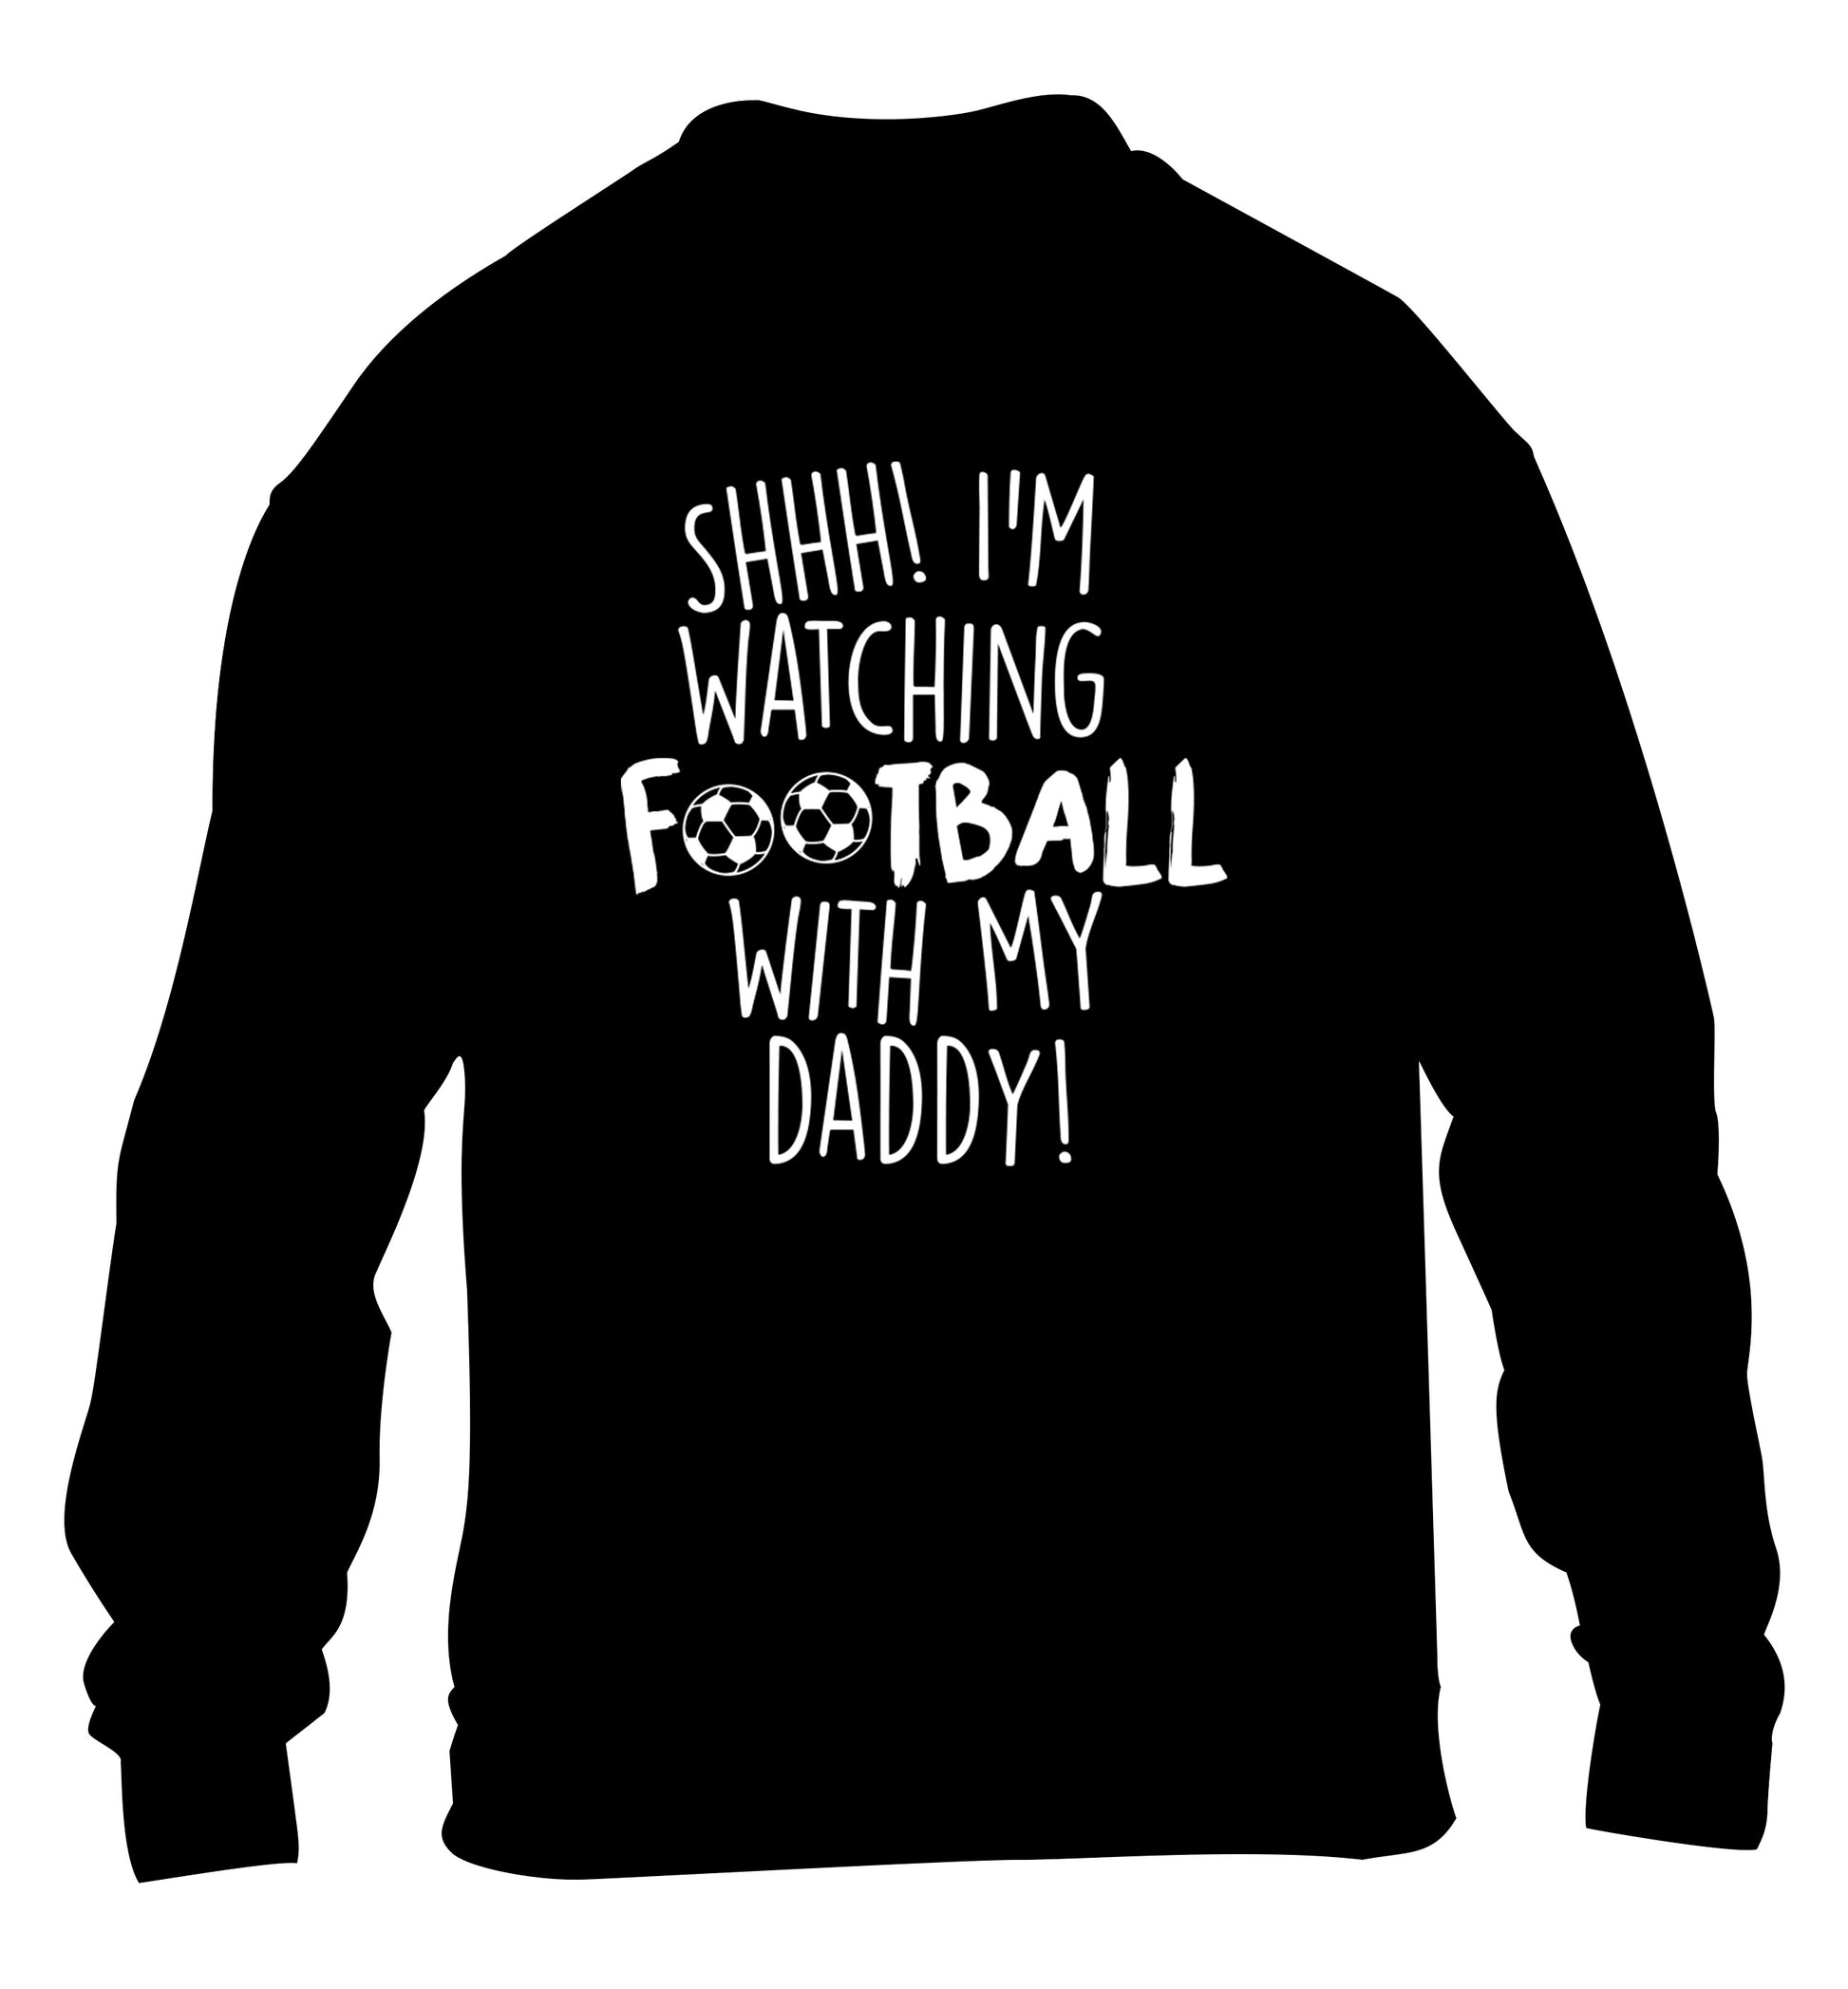 Shhh I'm watching football with my daddy children's black sweater 12-14 Years